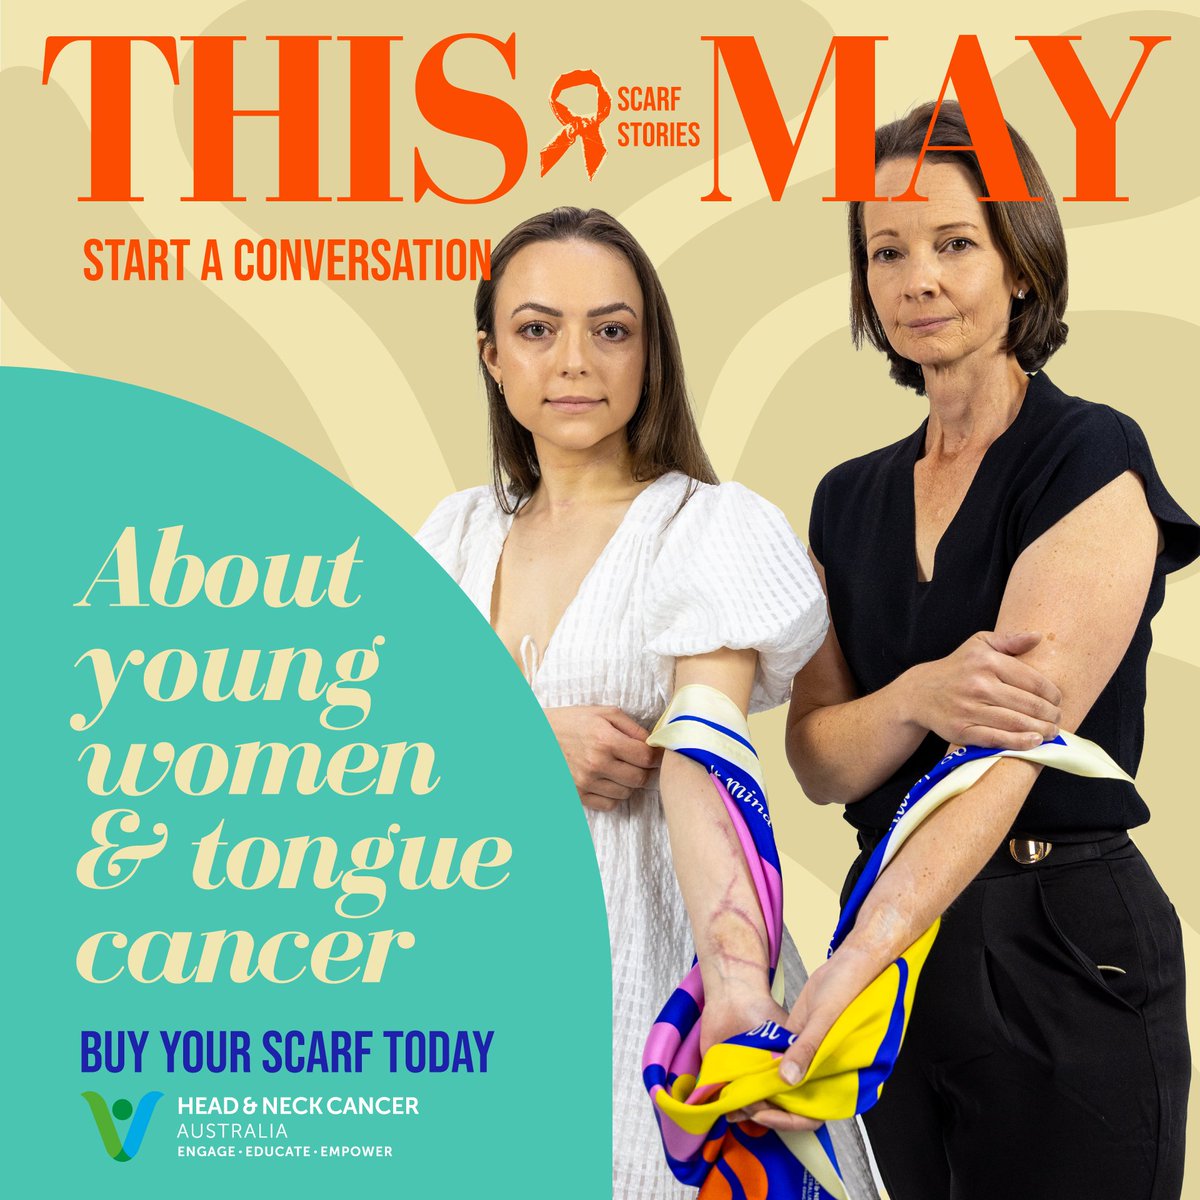 Kate & Lora are young women diagnosed with #tonguecancer with no typical risk factors like a history of smoking & drinking. They represent “The Changing Face of #HeadandNeckCancer.” Read about 'Scarf Stories' and order your scarf at …y-scarf-tells-a-story.raiselysite.com #MothersDayGifts